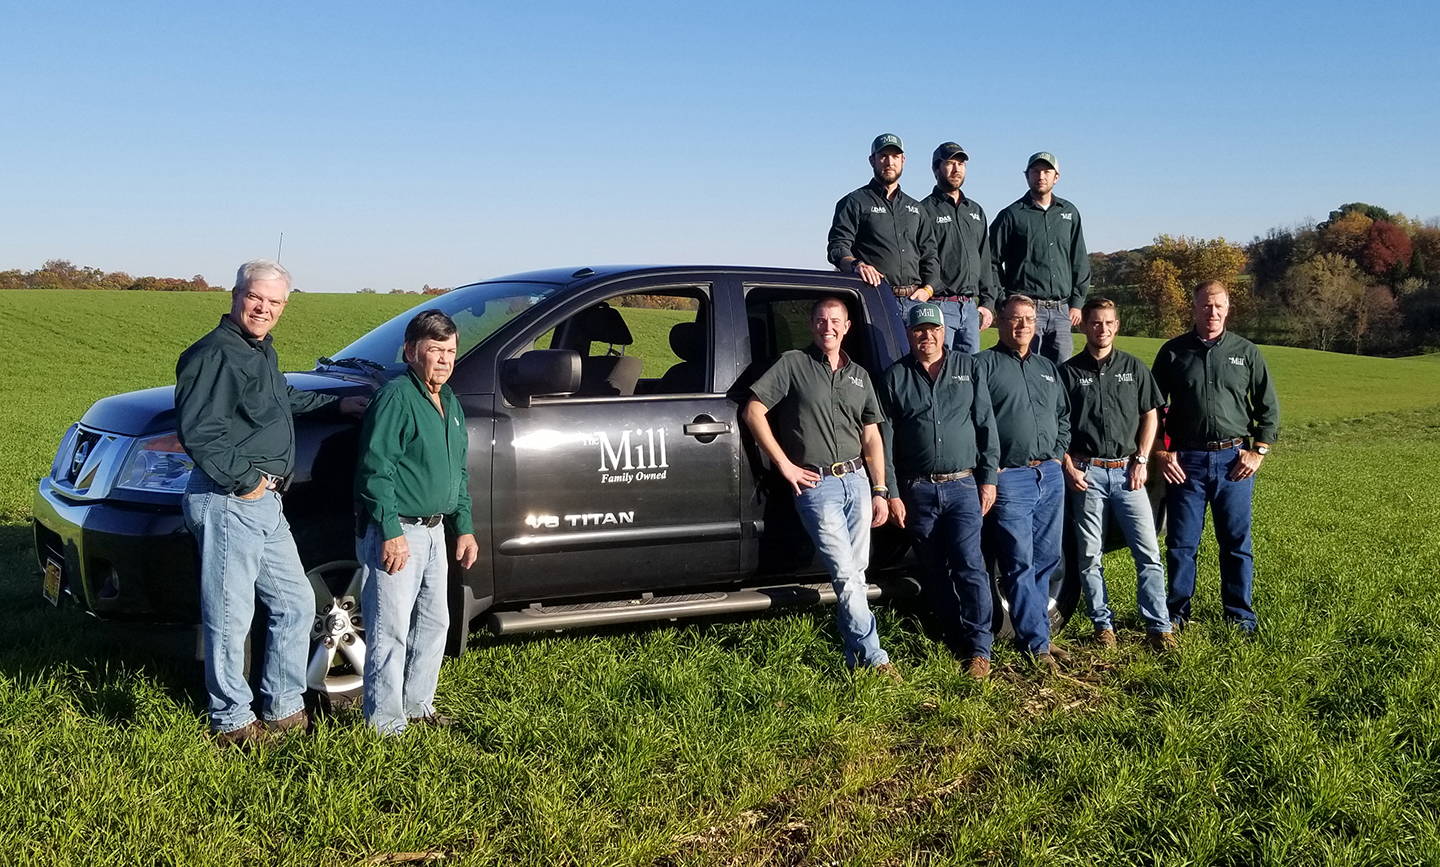 The Mill agronomists next to a pickup